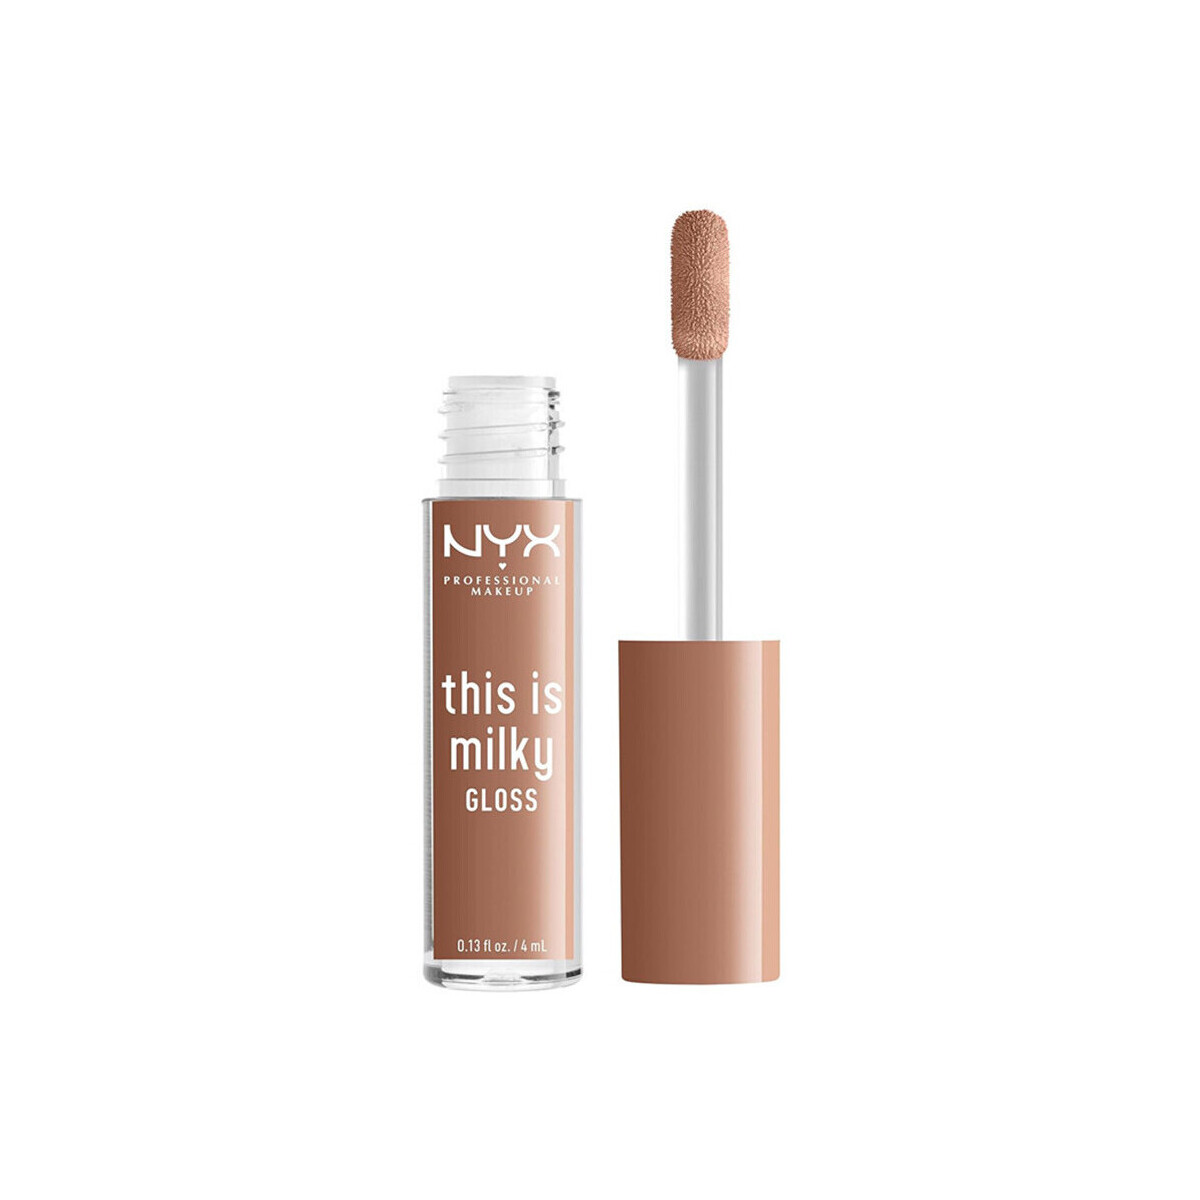 Beauté Femme Gloss Nyx Professional Make Up Gloss This is Milky Édition Limitée Beige